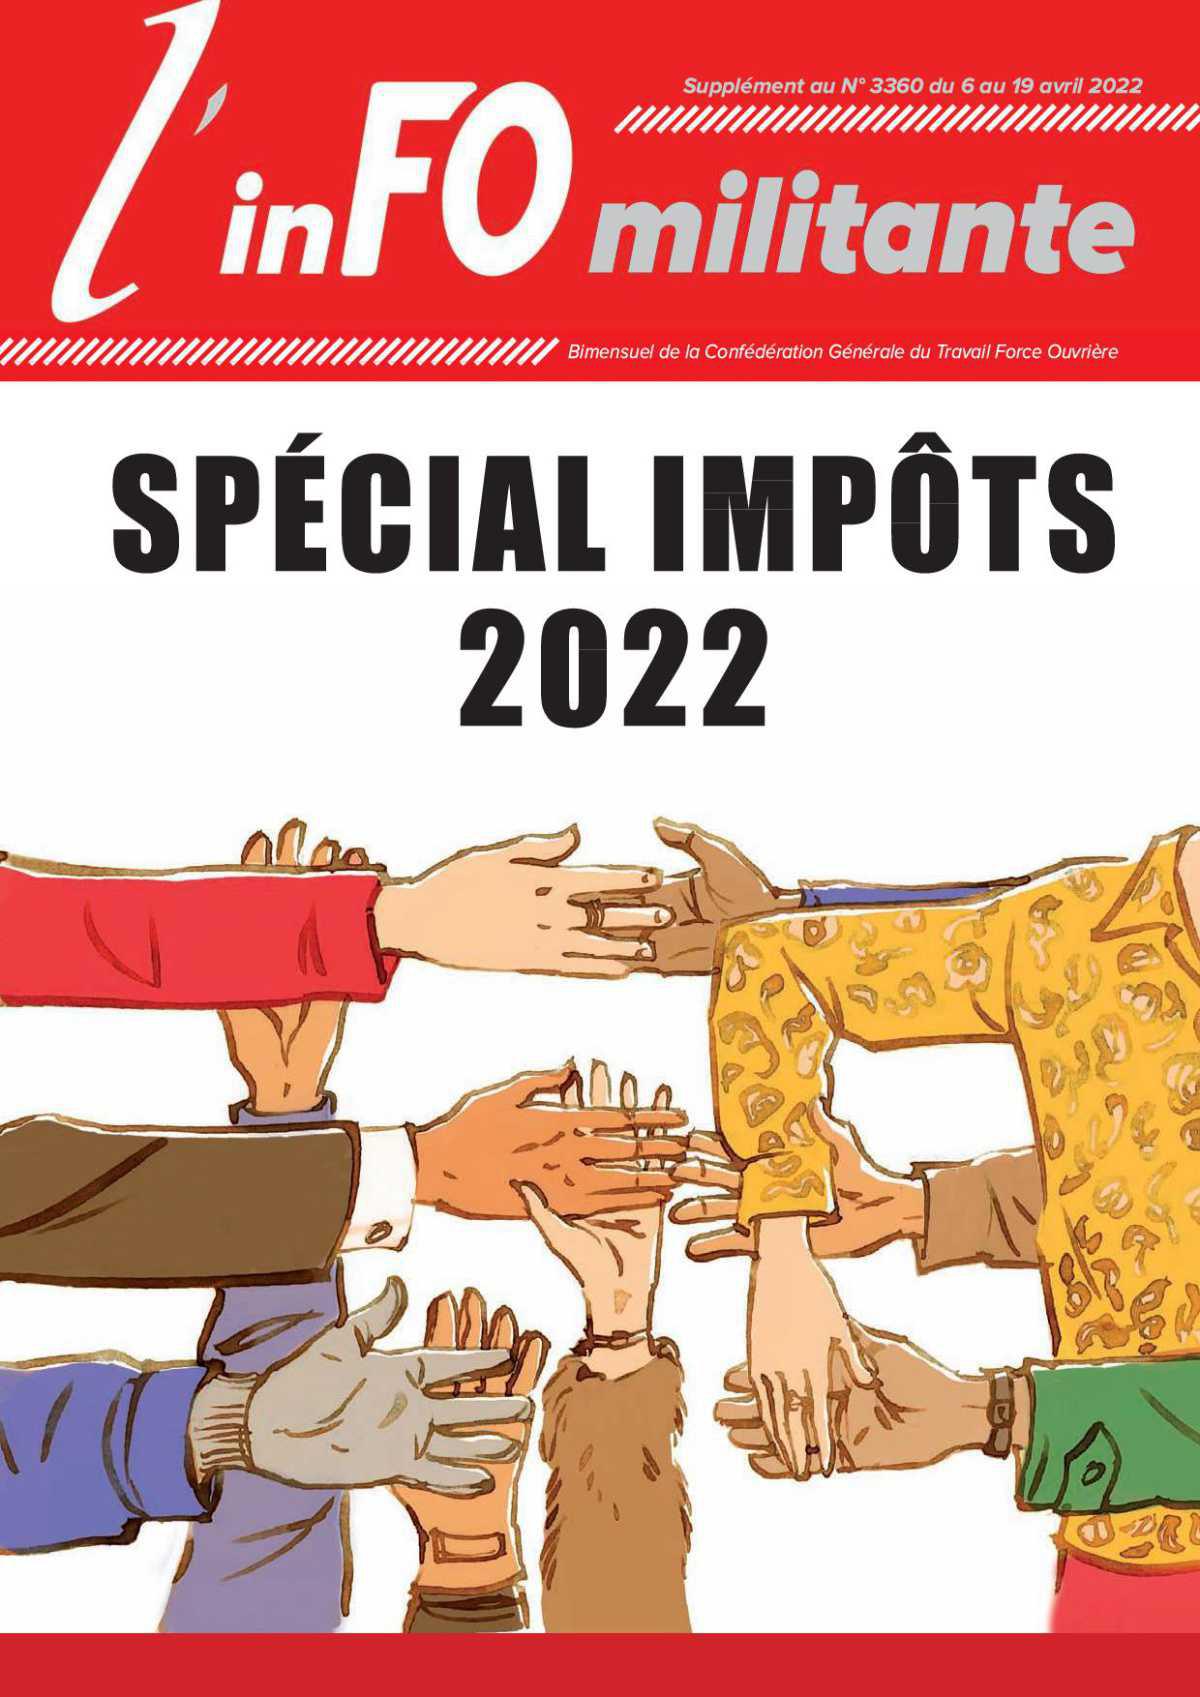 SPECIAL IMPOTS 2022